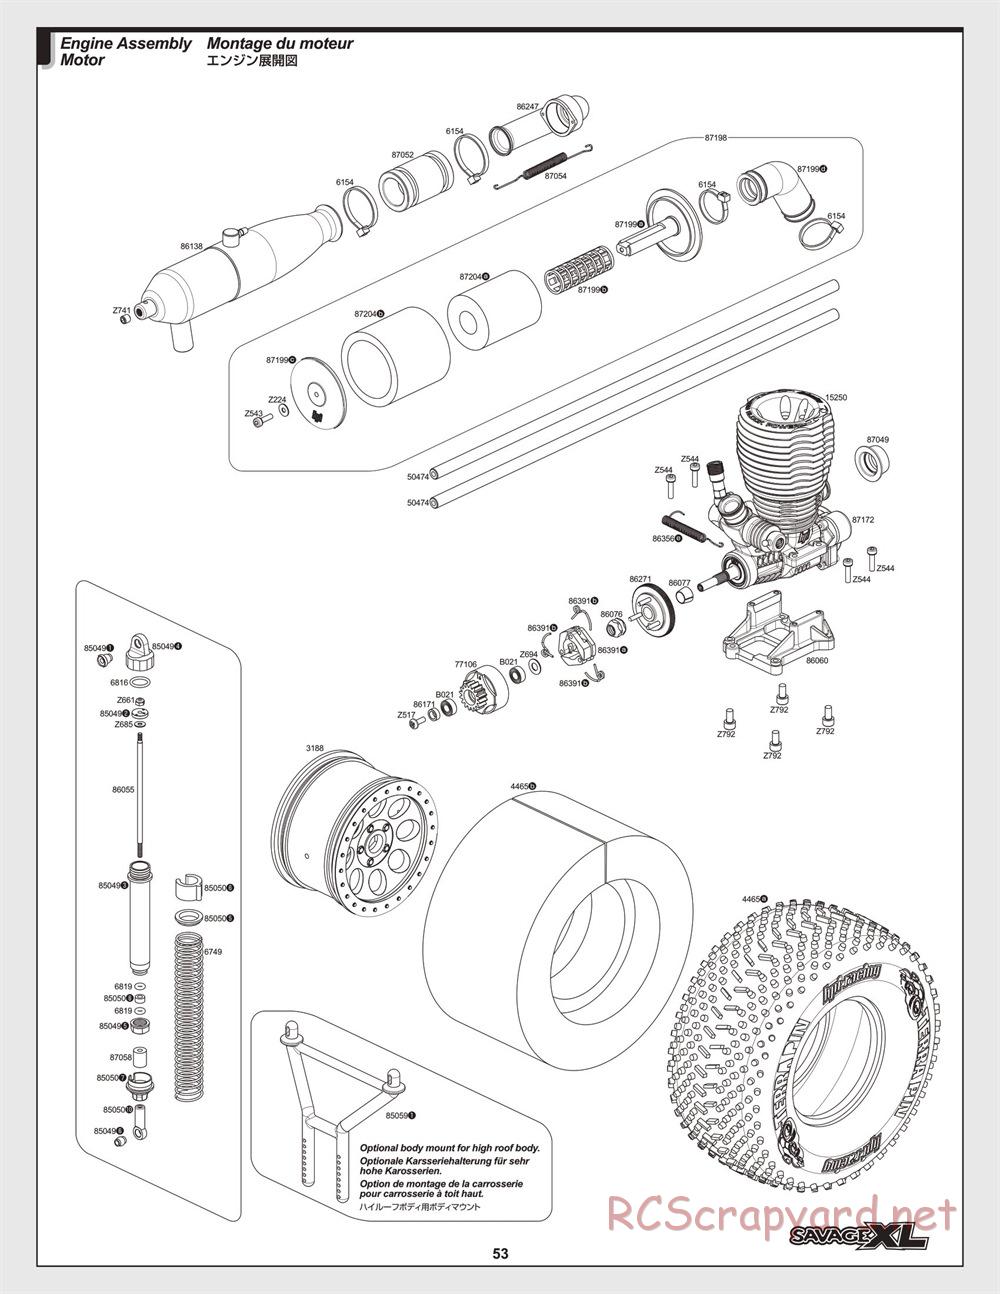 HPI - Savage XL 5.9 - Exploded View - Page 53